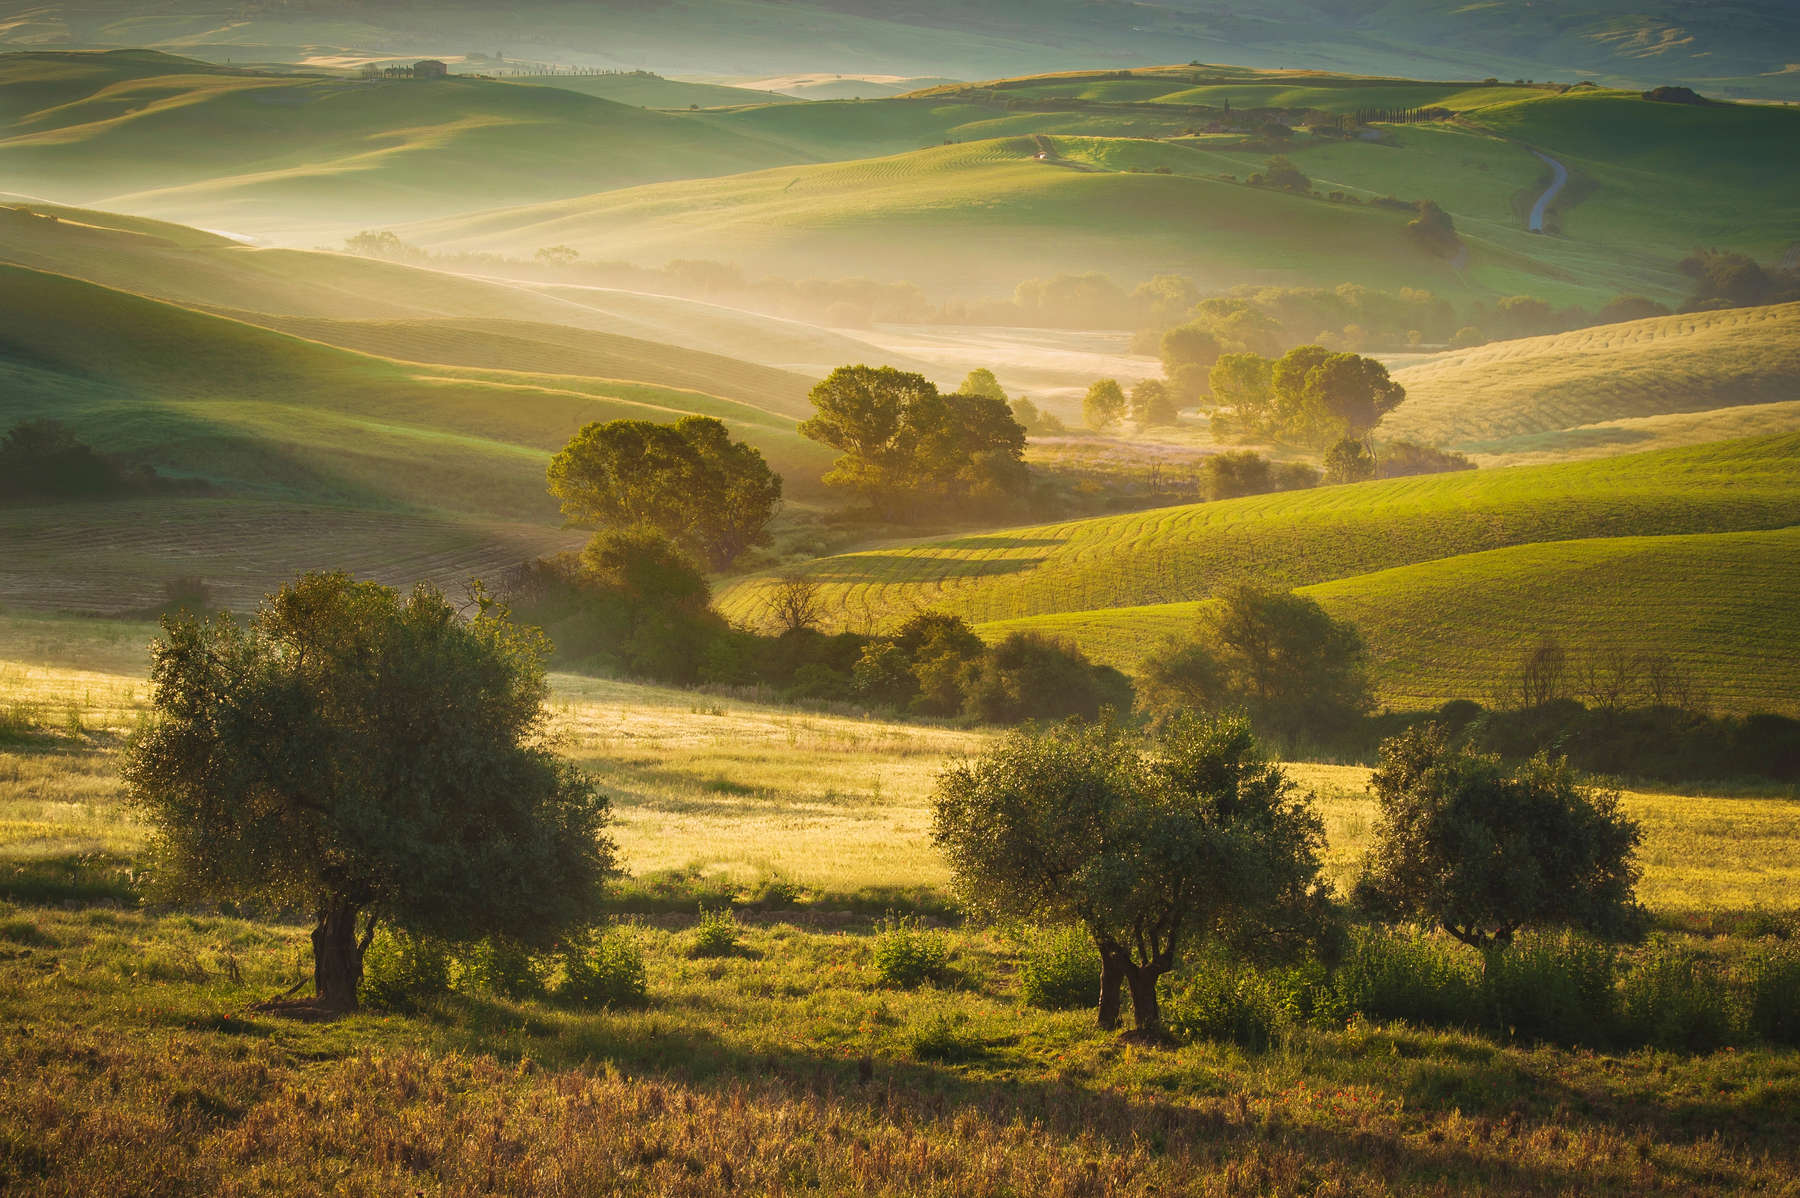 Tuscan olive trees and fields in the area of Siena, Italy